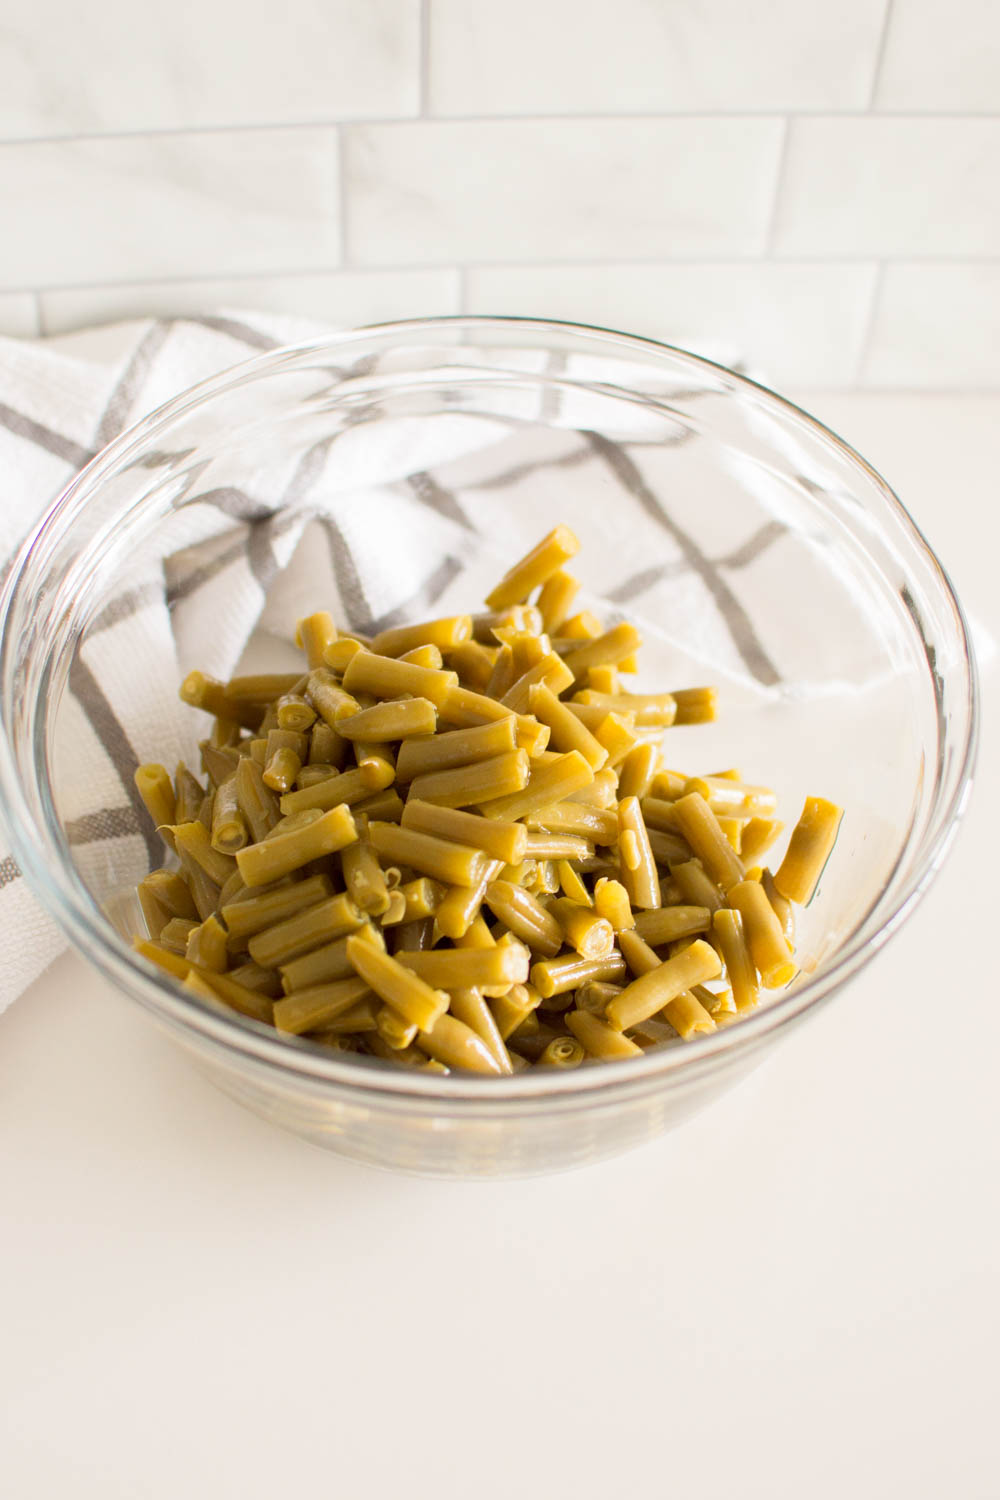 Canned green beans drained and poured into a large glass bowl